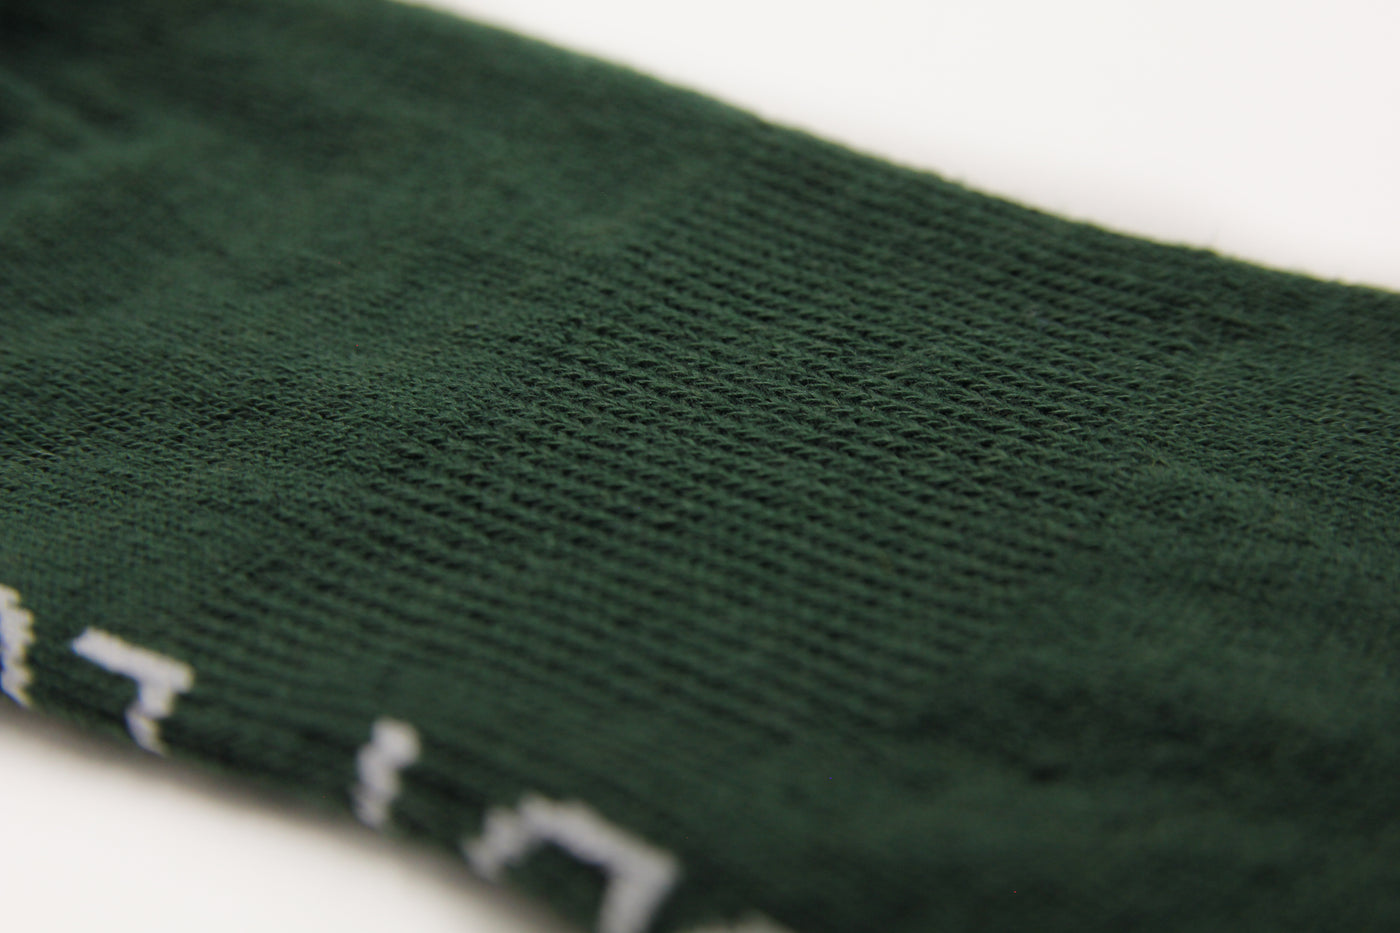 Ecofriendly evergreen socks with arch support and seamless toe socks